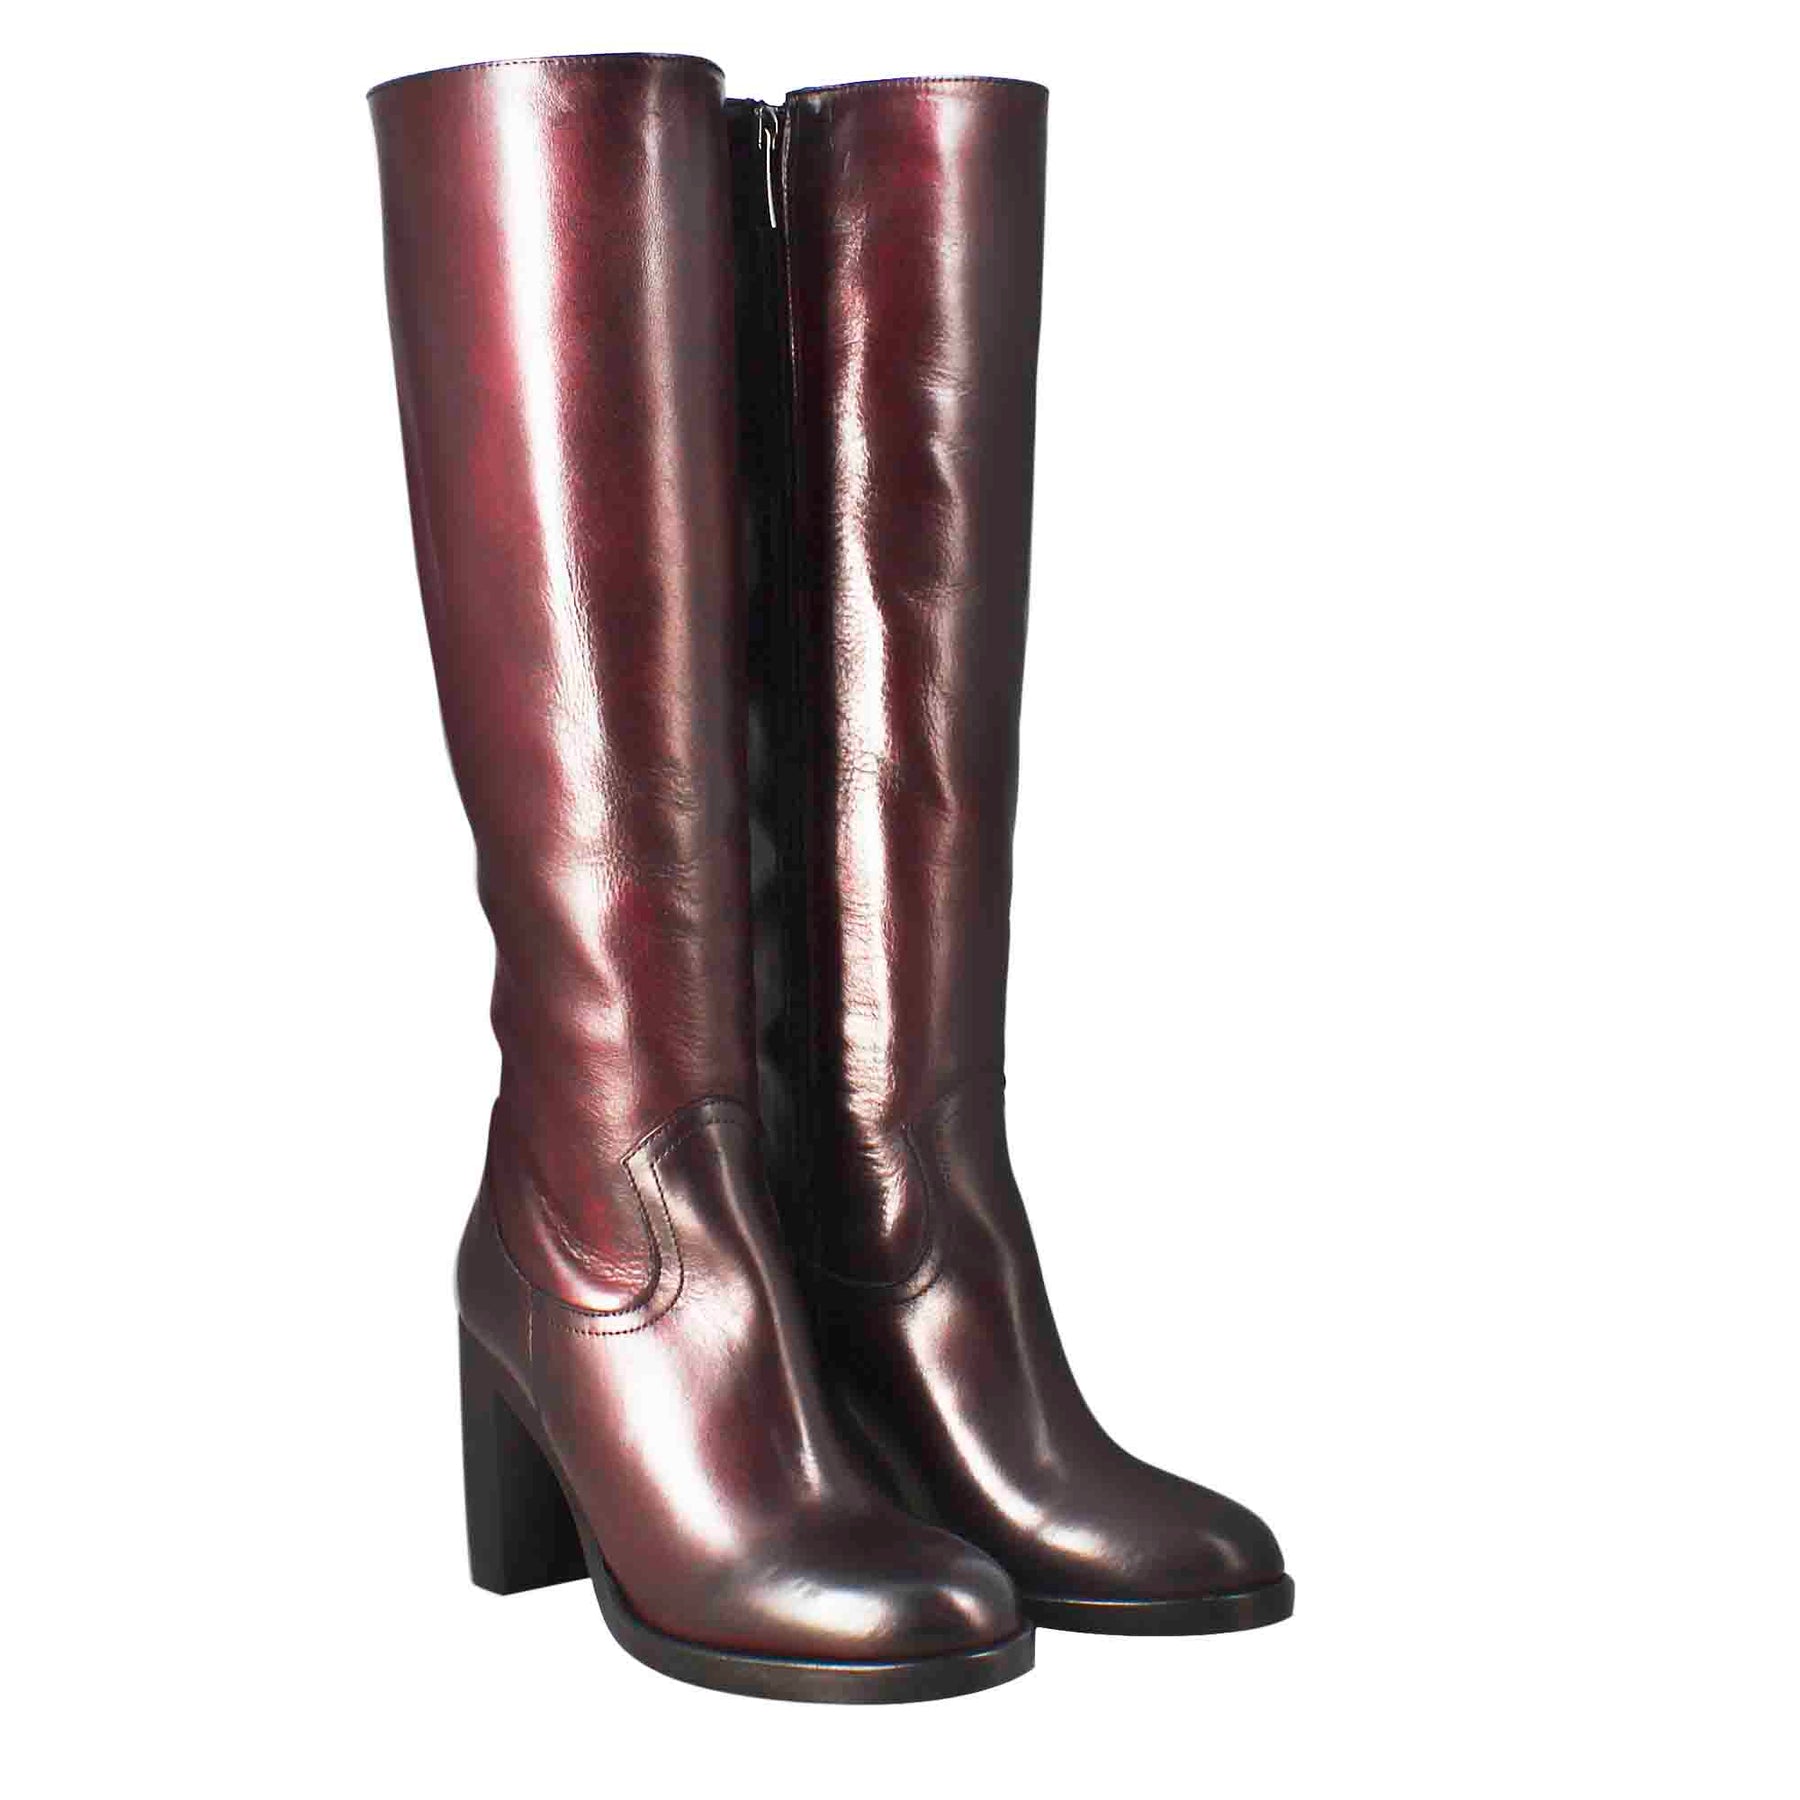 Smooth women's knee-high boot with high heel in burgundy leather